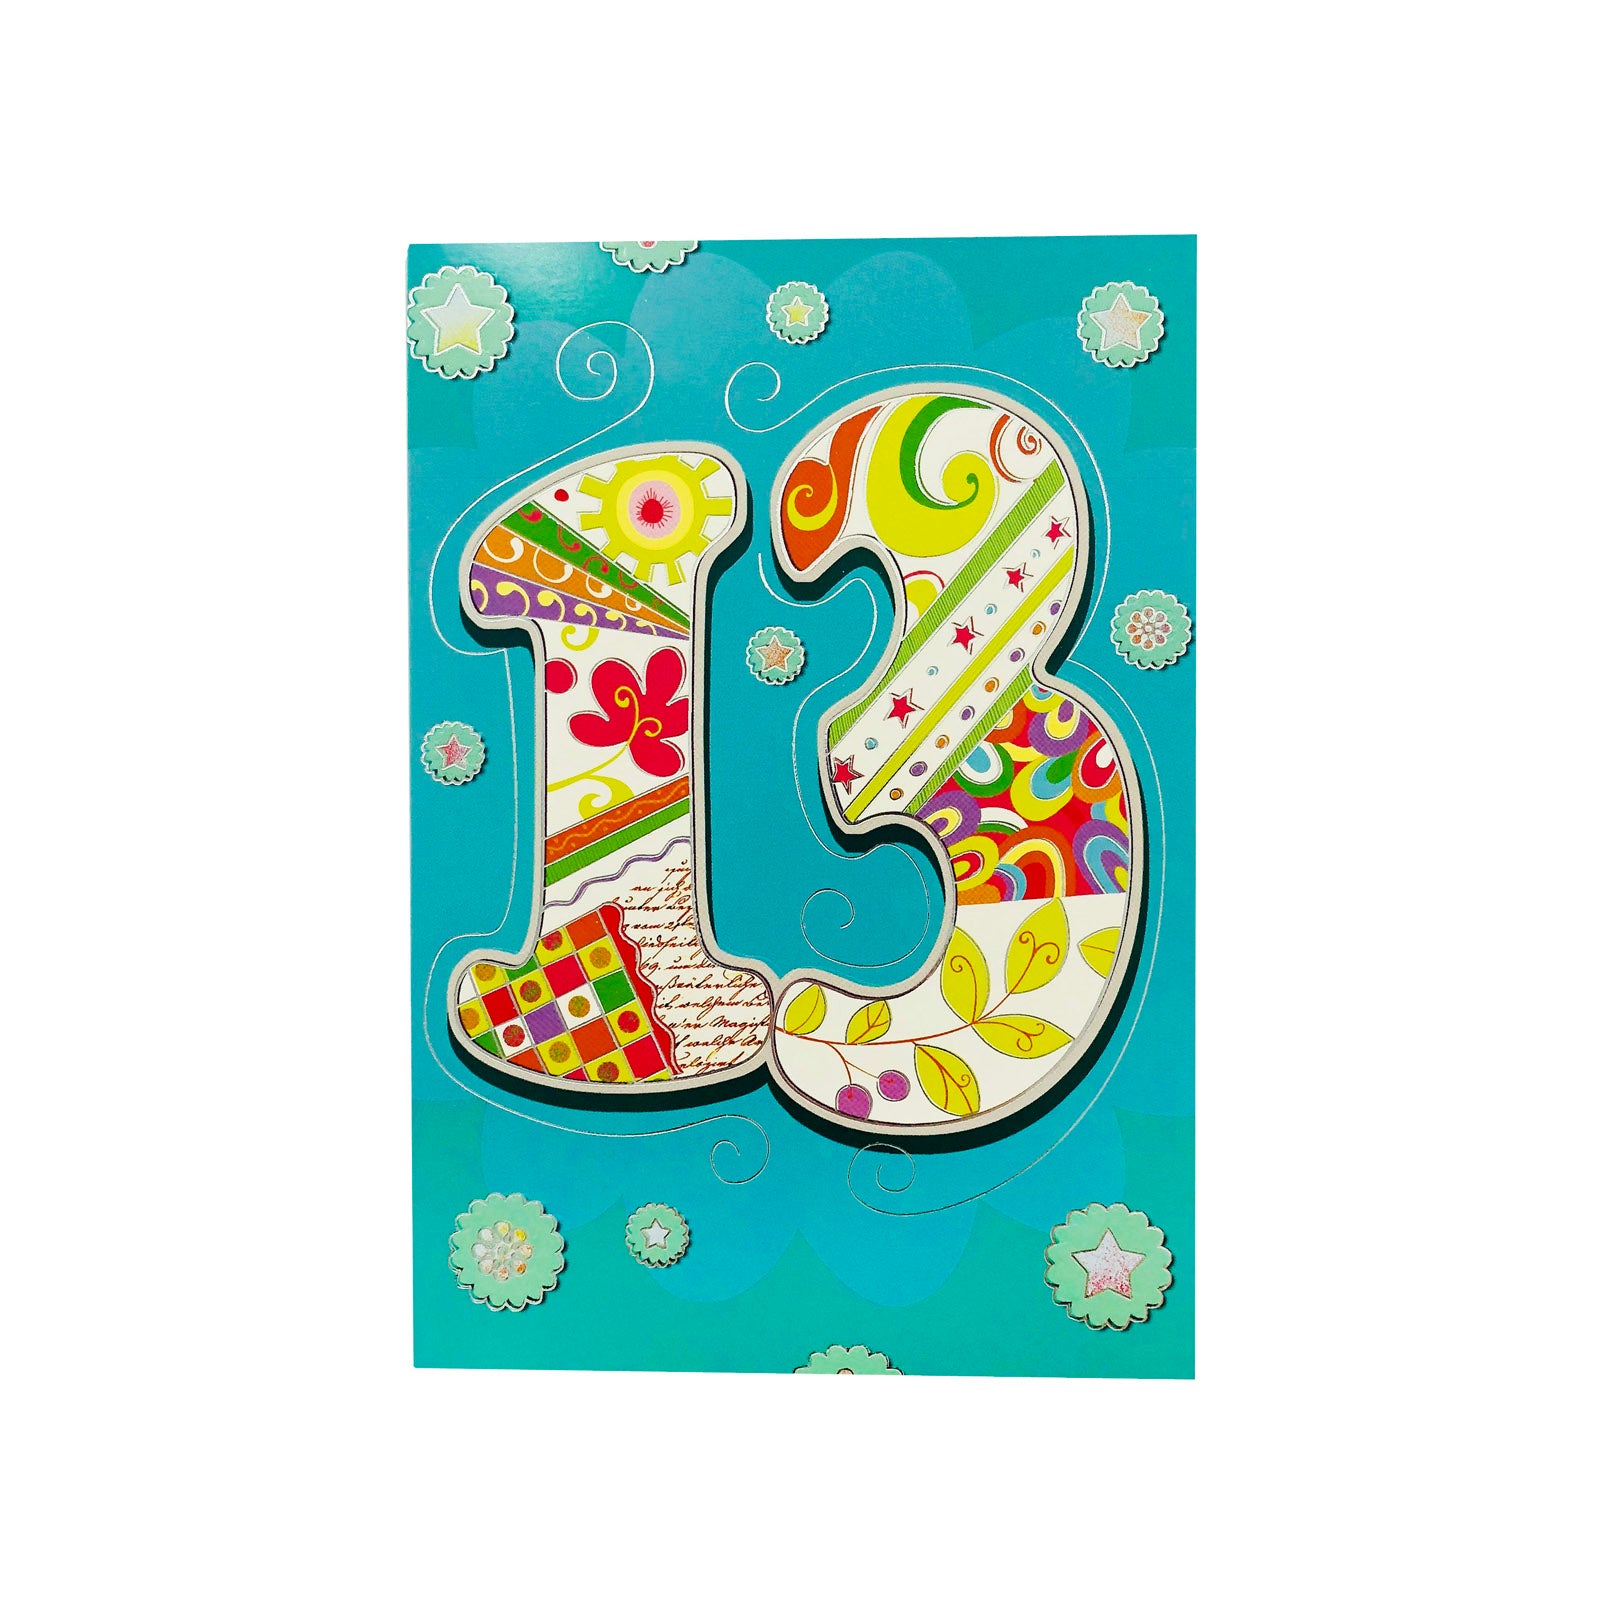 Designer Greetings Birthday Card Age 13 - 13 - Patterns In Turquoise